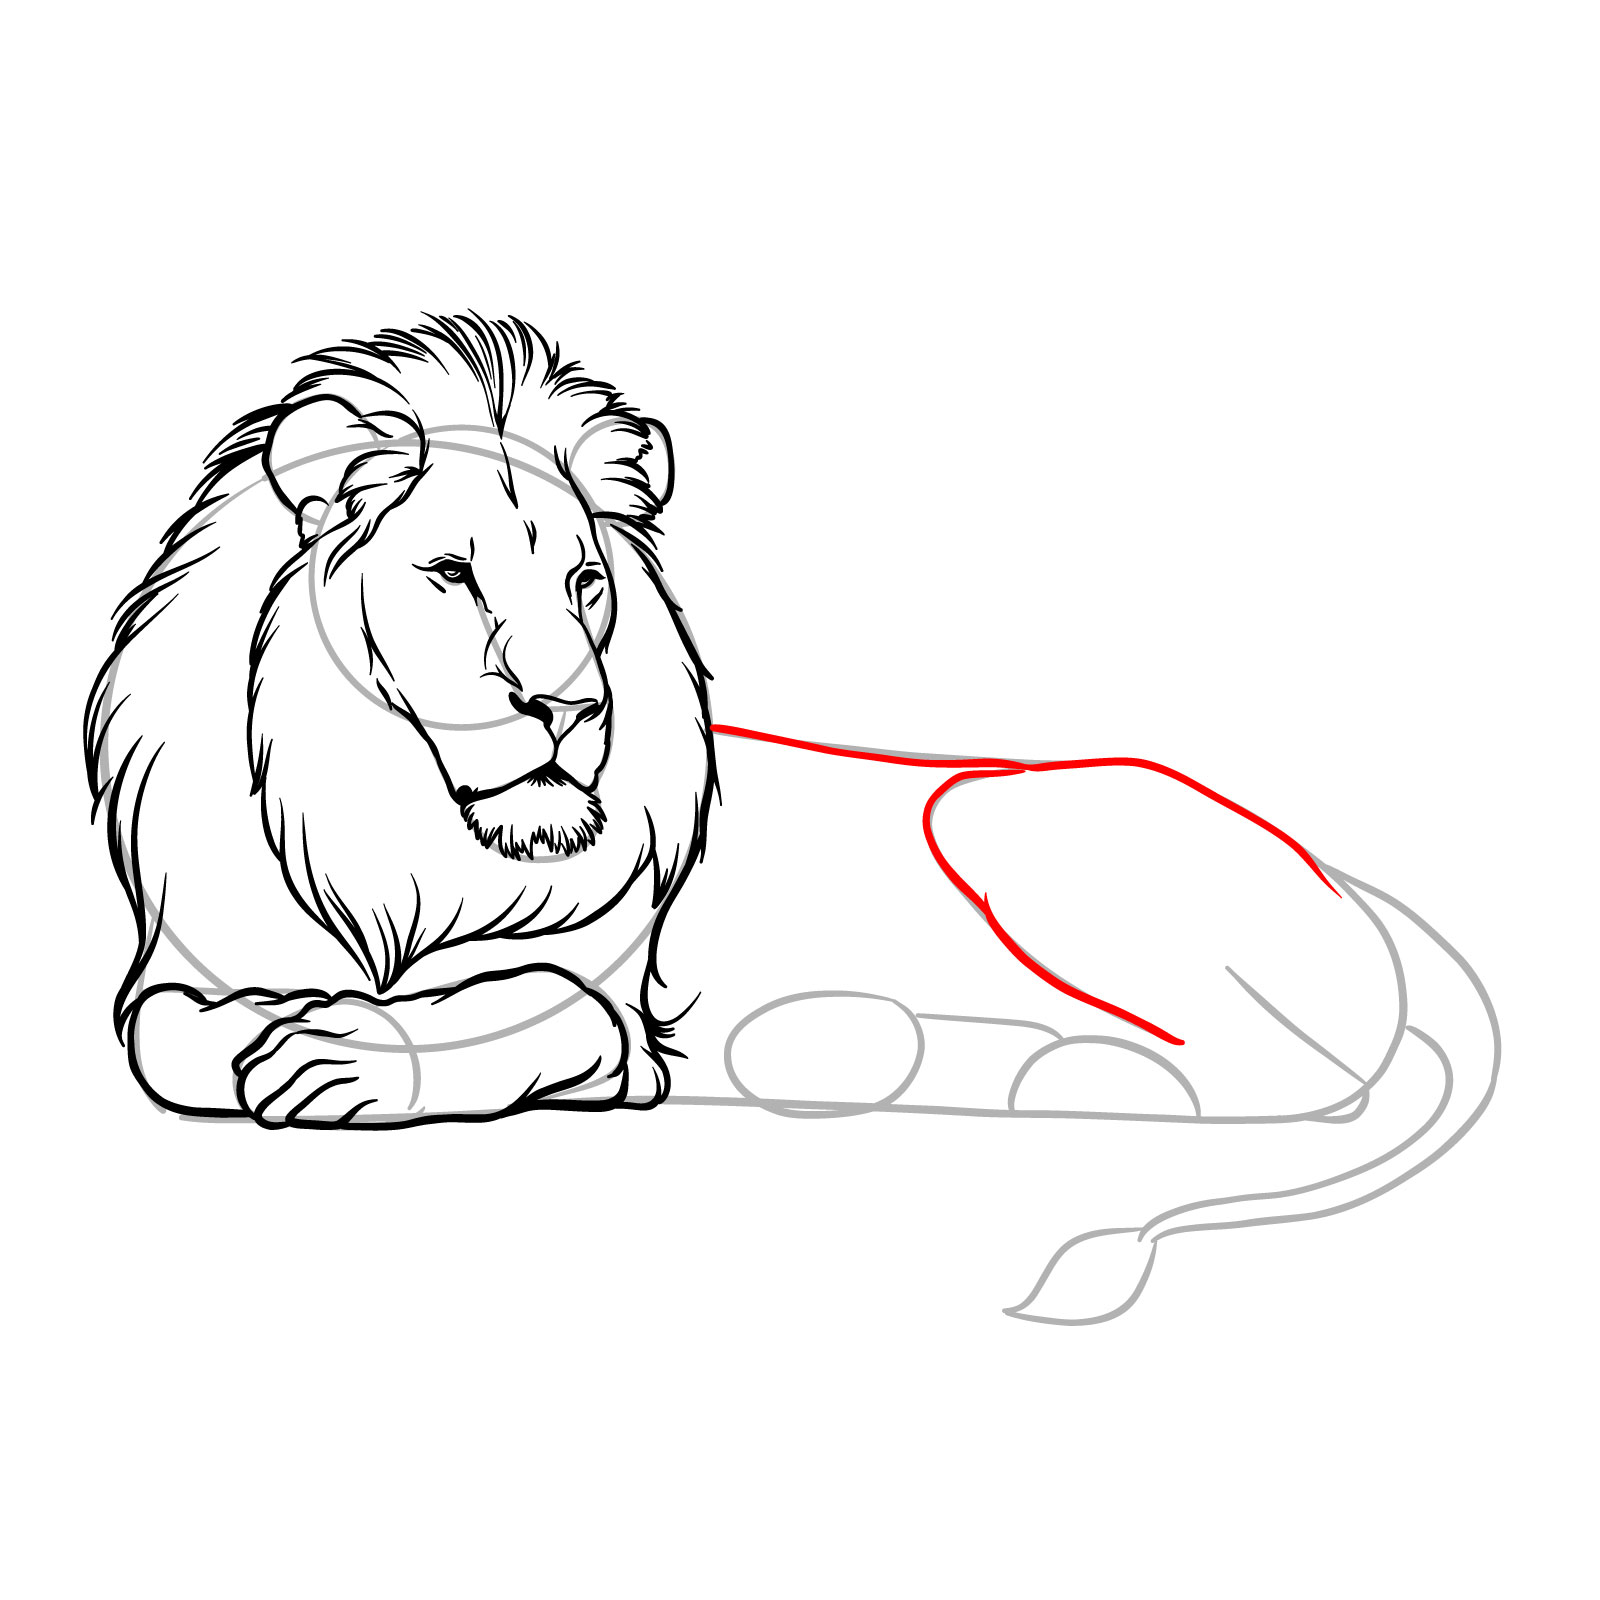 How to draw a lying lion in side view - Step 11: Outlining the back and upper rear leg